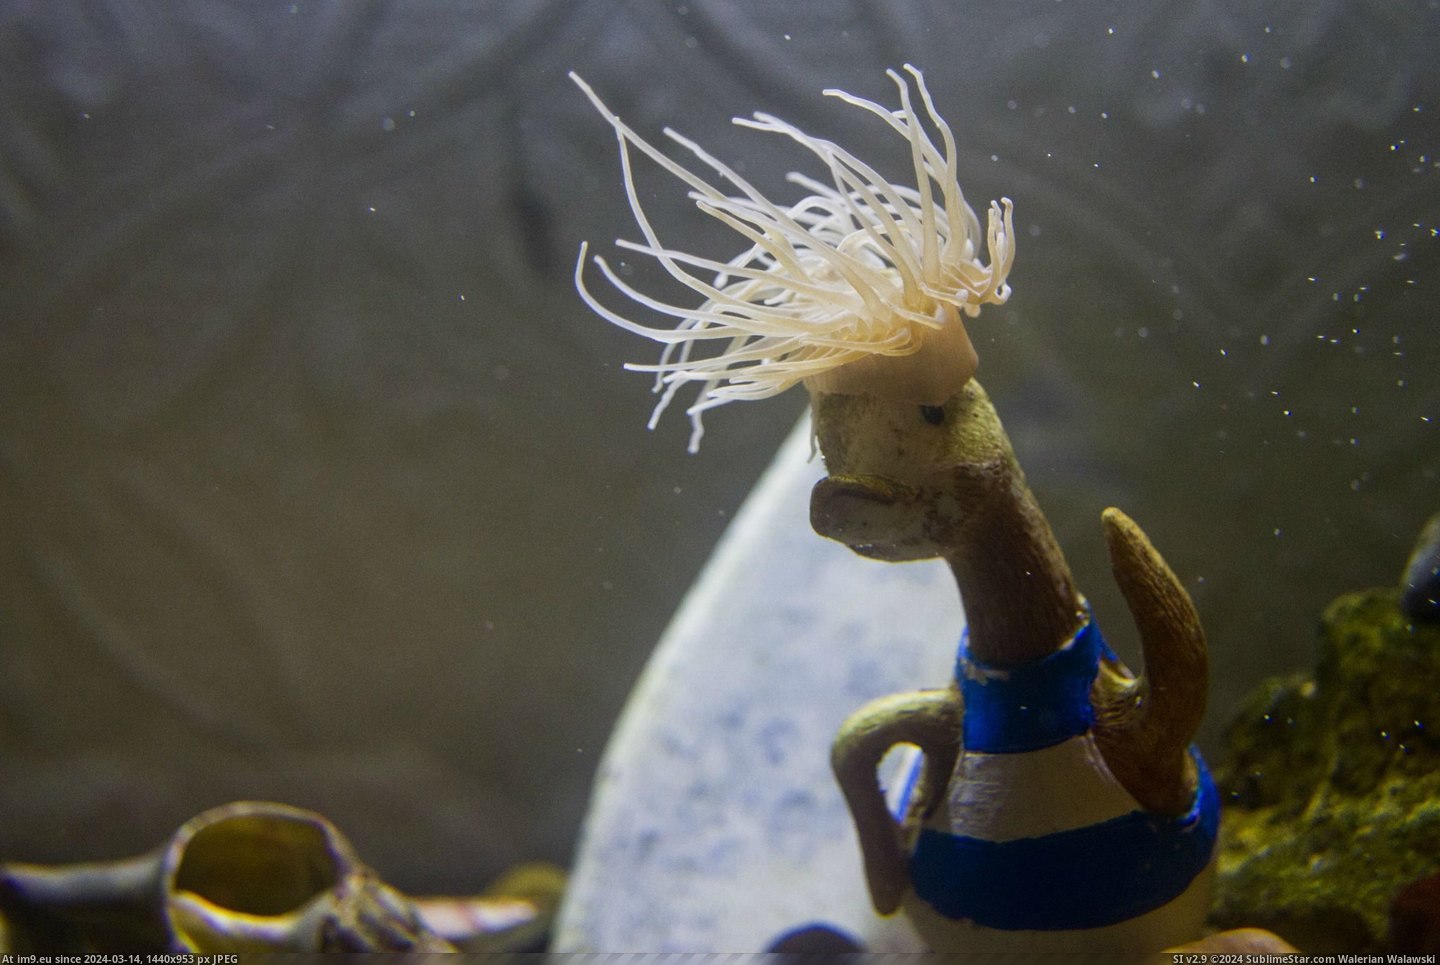 #Beautiful #Head #Decided #Tank #Ornament #Anemone #Latch #Sea #Giving #Duck [Pics] My snakelock anemone has decided to latch onto the head of the sassy duck ornament in my sea tank, giving it beautiful lo Pic. (Изображение из альбом My r/PICS favs))